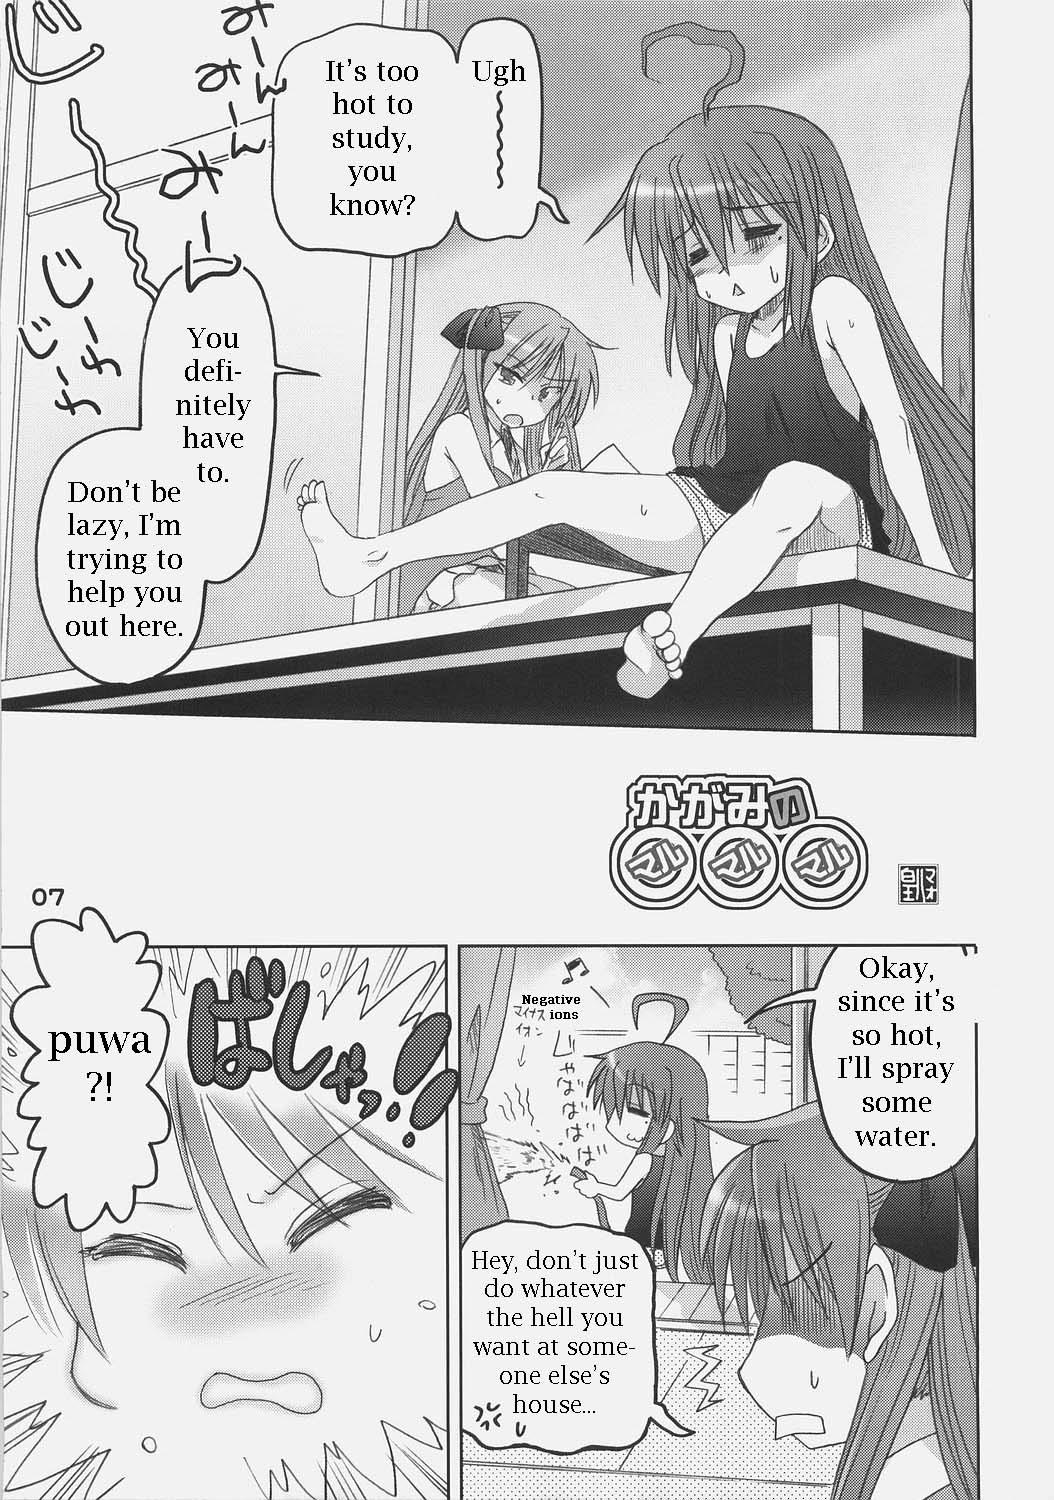 Time Kagami no Ashi no Ura | The Soles of Kagami's Feet - Lucky star Blowing - Page 4